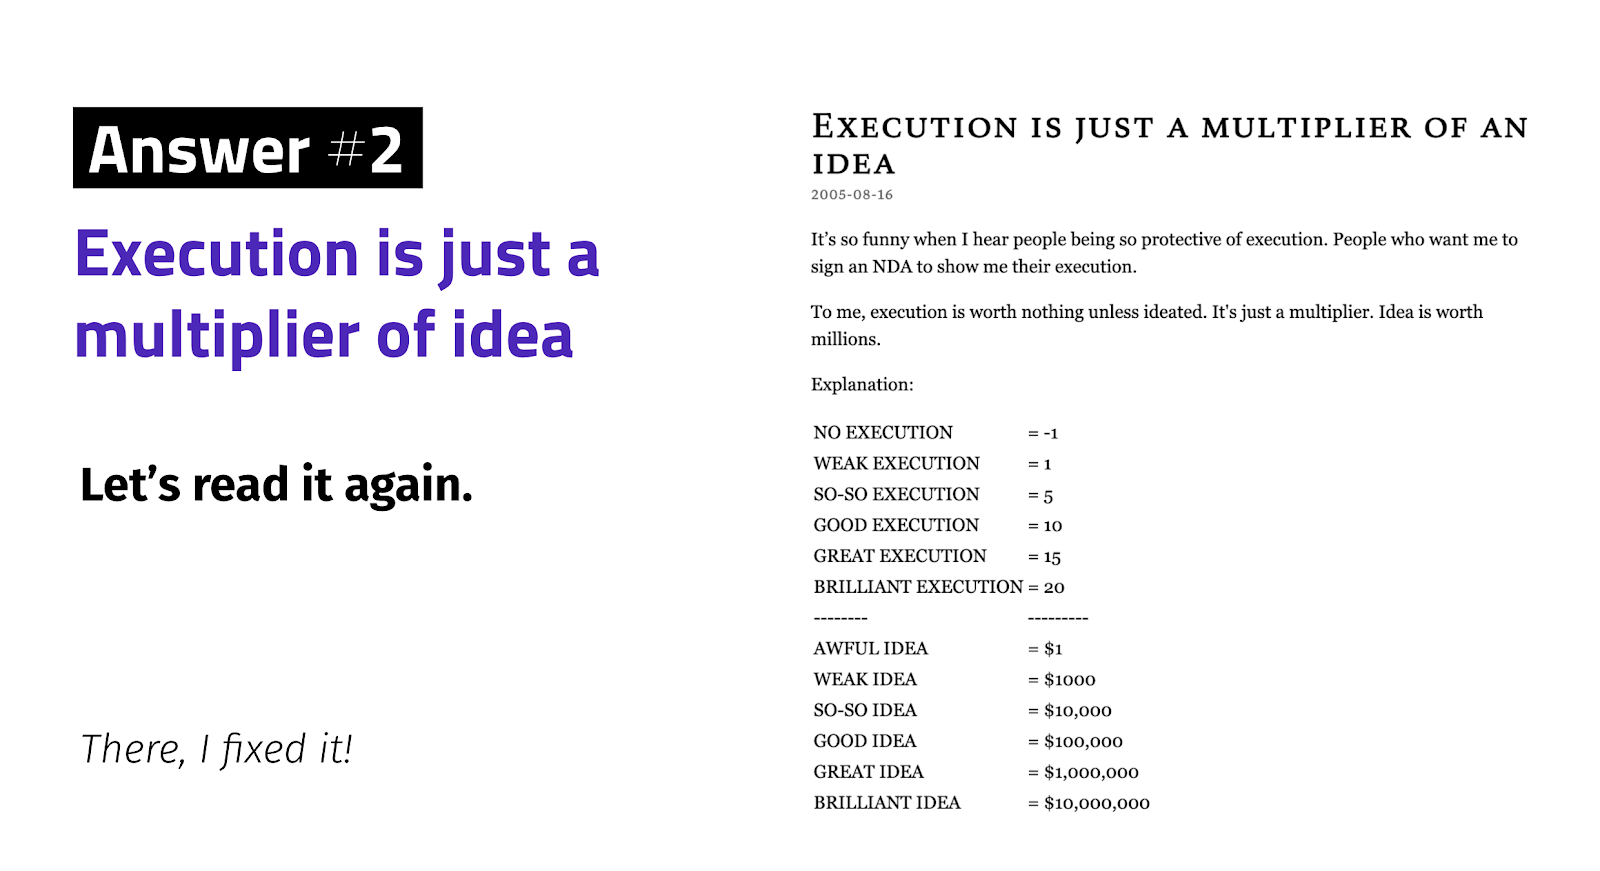 Execution is just a multiplier of an idea